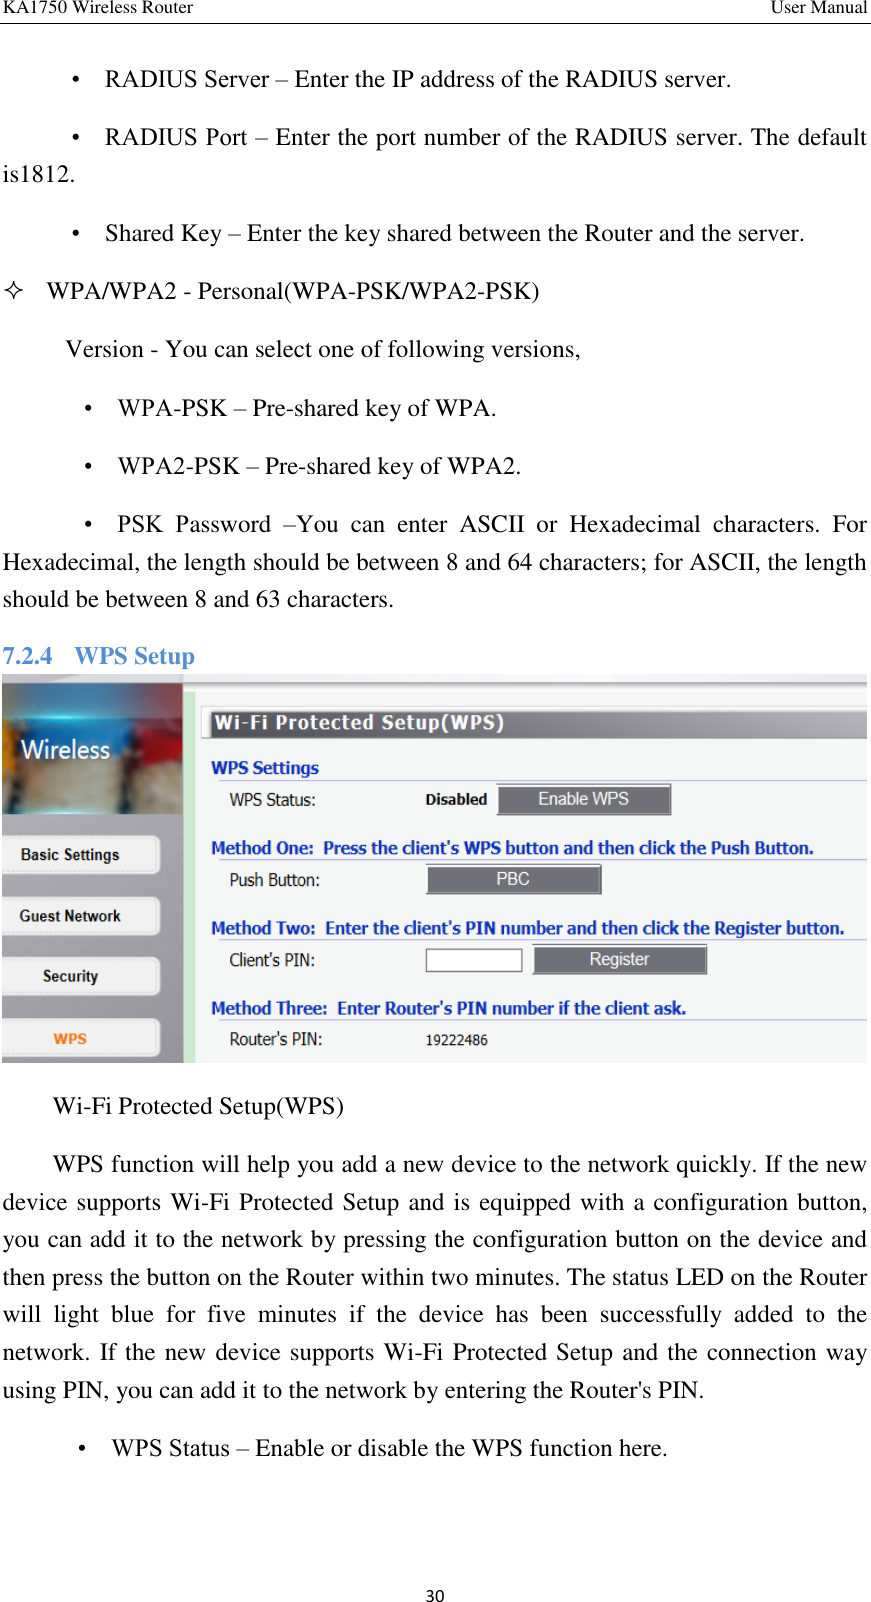 KA1750 Wireless Router       User Manual 30     •    RADIUS Server – Enter the IP address of the RADIUS server.    •    RADIUS Port – Enter the port number of the RADIUS server. The default is1812.    •    Shared Key – Enter the key shared between the Router and the server.    WPA/WPA2 - Personal(WPA-PSK/WPA2-PSK)   Version - You can select one of following versions,       •    WPA-PSK – Pre-shared key of WPA.     •    WPA2-PSK – Pre-shared key of WPA2.       •    PSK  Password  –You  can  enter  ASCII  or  Hexadecimal  characters.  For Hexadecimal, the length should be between 8 and 64 characters; for ASCII, the length should be between 8 and 63 characters. 7.2.4    WPS Setup  Wi-Fi Protected Setup(WPS) WPS function will help you add a new device to the network quickly. If the new device supports Wi-Fi Protected Setup and is equipped with a configuration button, you can add it to the network by pressing the configuration button on the device and then press the button on the Router within two minutes. The status LED on the Router will  light  blue  for  five  minutes  if  the  device  has  been  successfully  added  to  the network. If the new device supports Wi-Fi Protected Setup and the connection way using PIN, you can add it to the network by entering the Router&apos;s PIN. •    WPS Status – Enable or disable the WPS function here. 